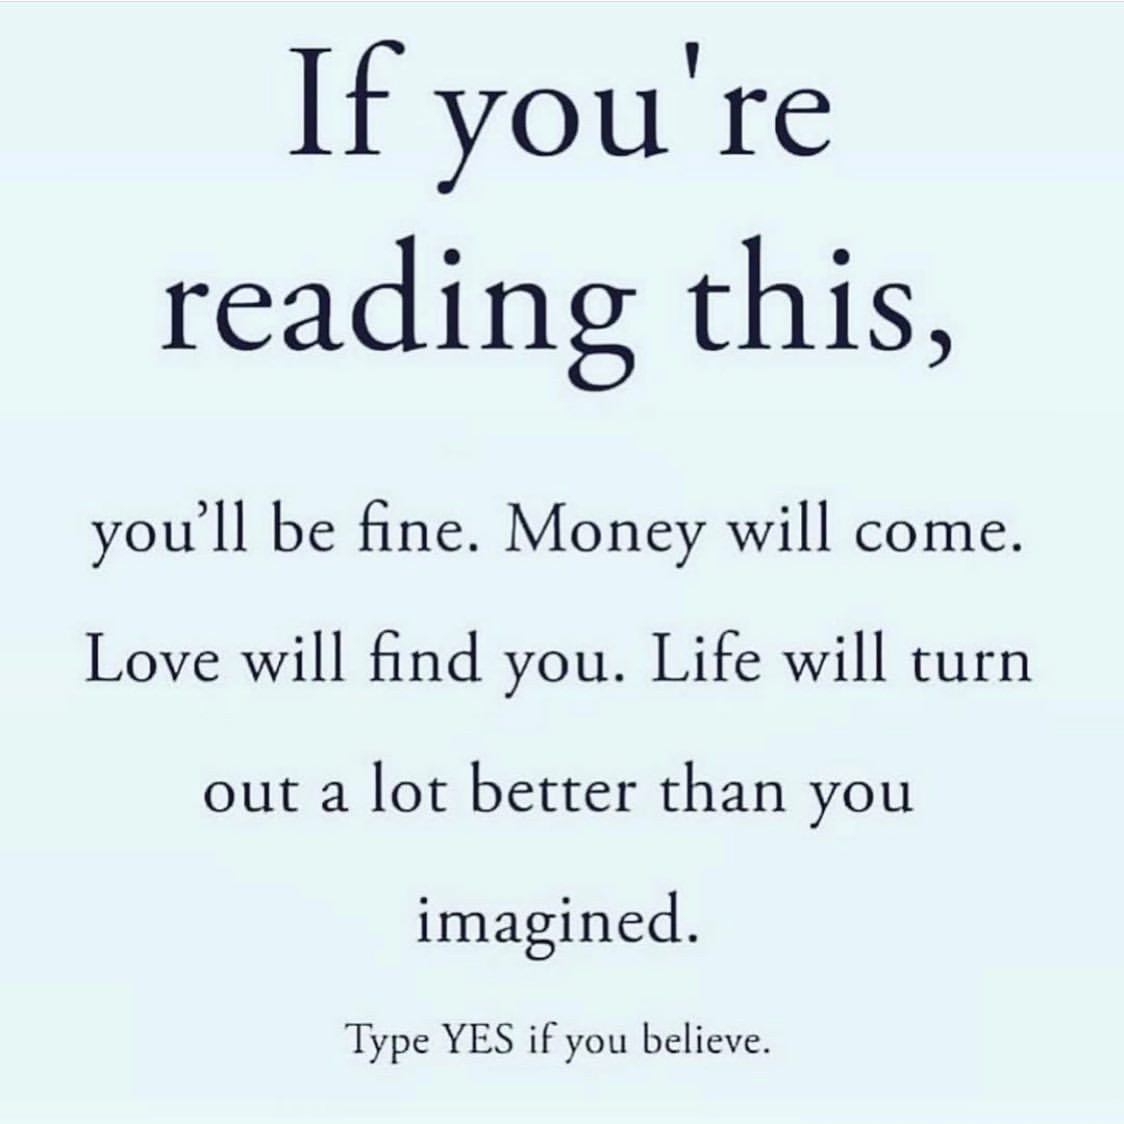 If you're reading this, you'll be fine. Money will come. Love will find you. Life will turn out a lot better than you imagined. Type yes if you believe.